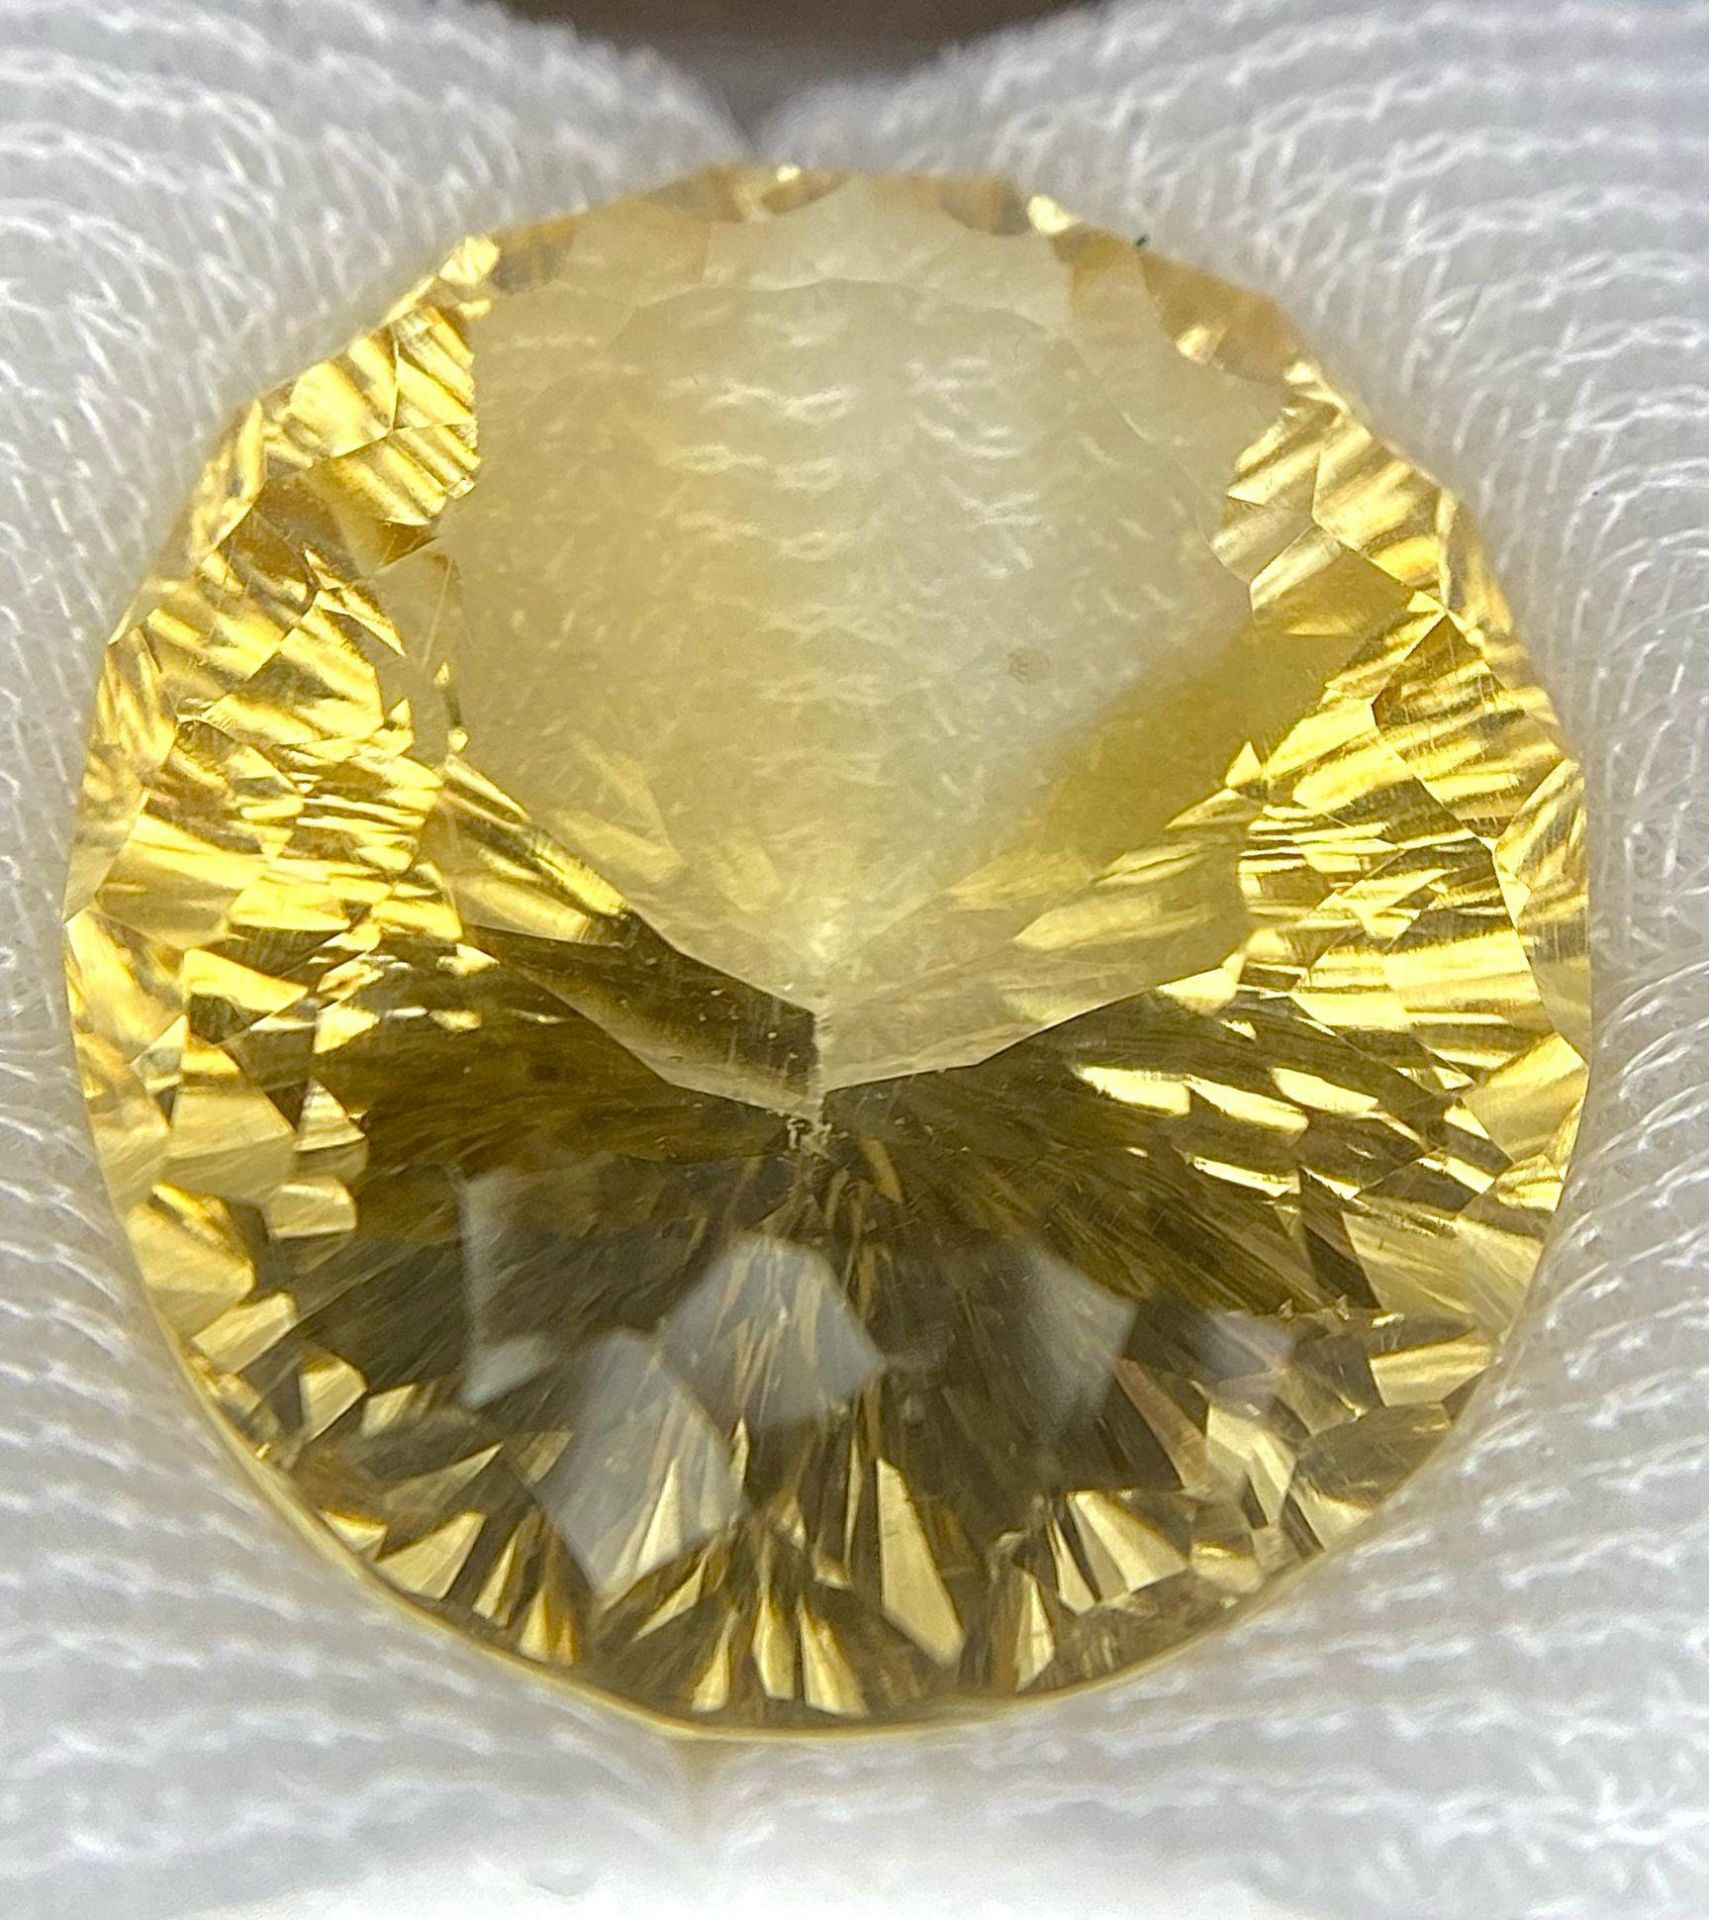 A Sealed 51.75ct Madagascar Natural Citrine Gemstone - Oval cut. Comes with the AIG Certificate.